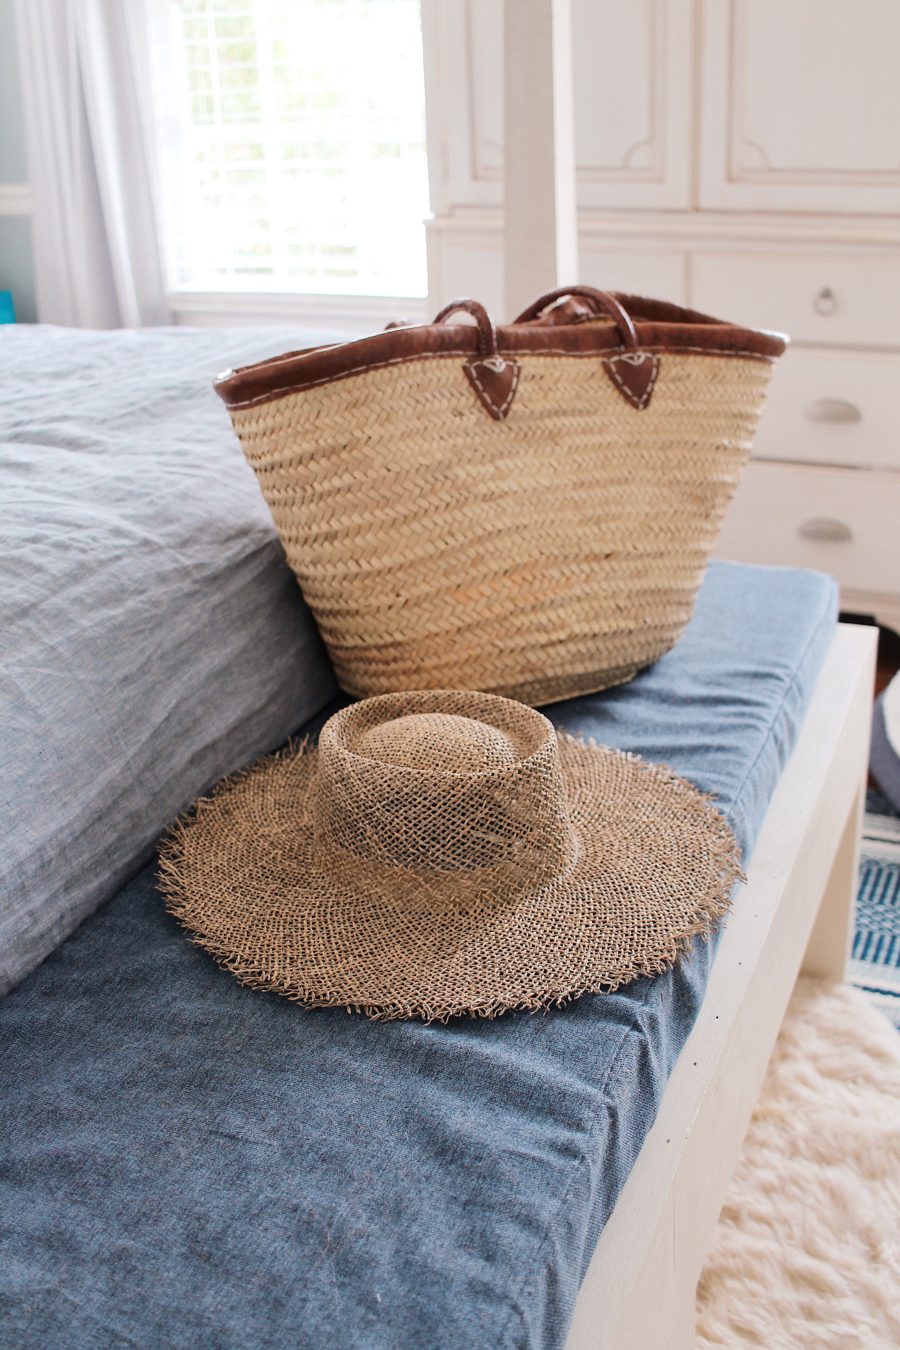 straw, rattan, and wicker obsession